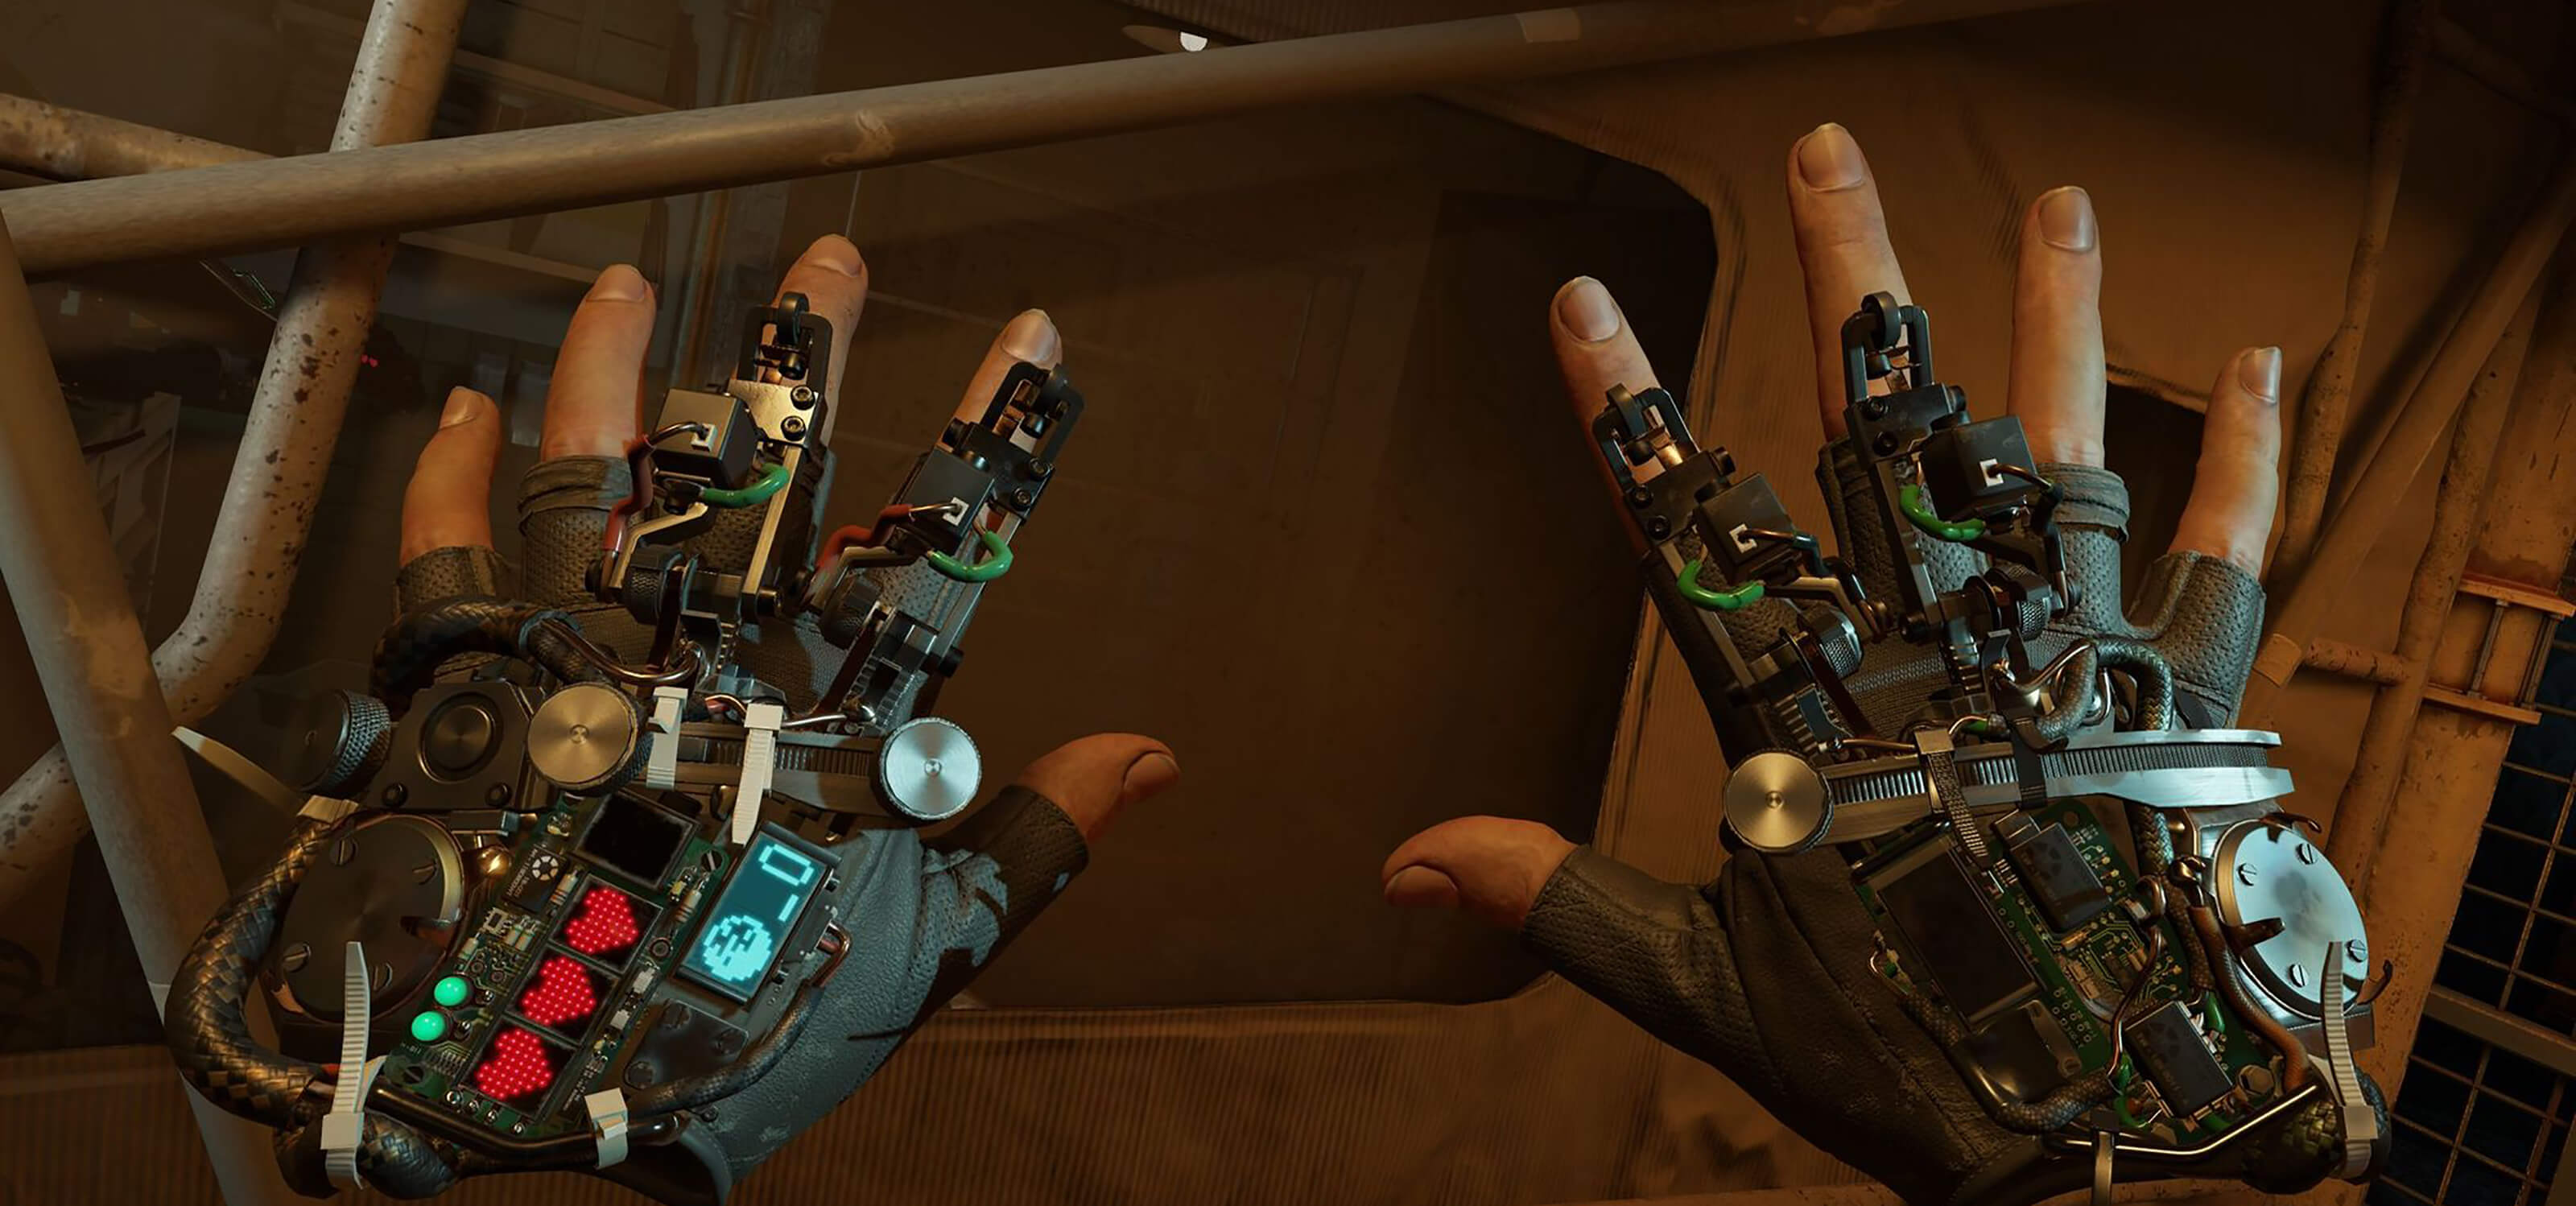 Half-Life: Alyx screenshot – close-up view of the ‘gravity gloves’ device